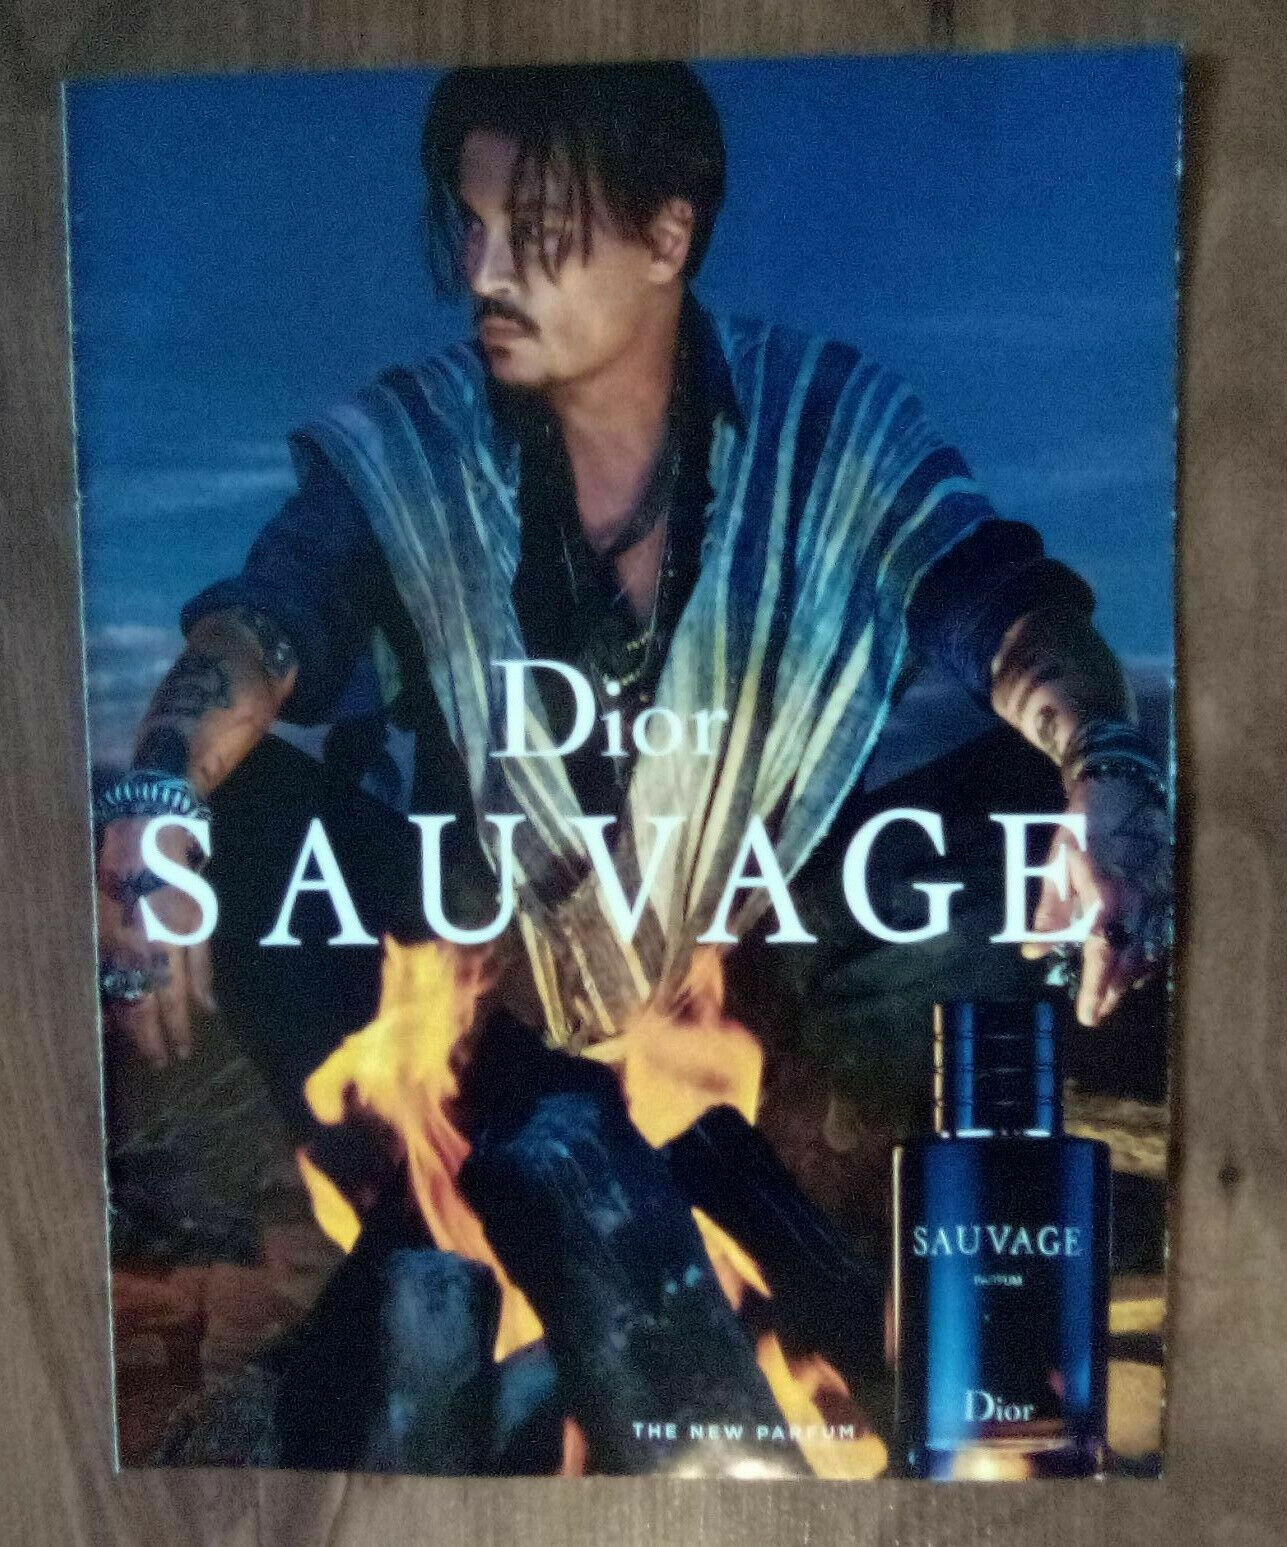 Johnny Depp for Dior Sauvage Cologne 2019 Print Ad and Scent - Great to Frame